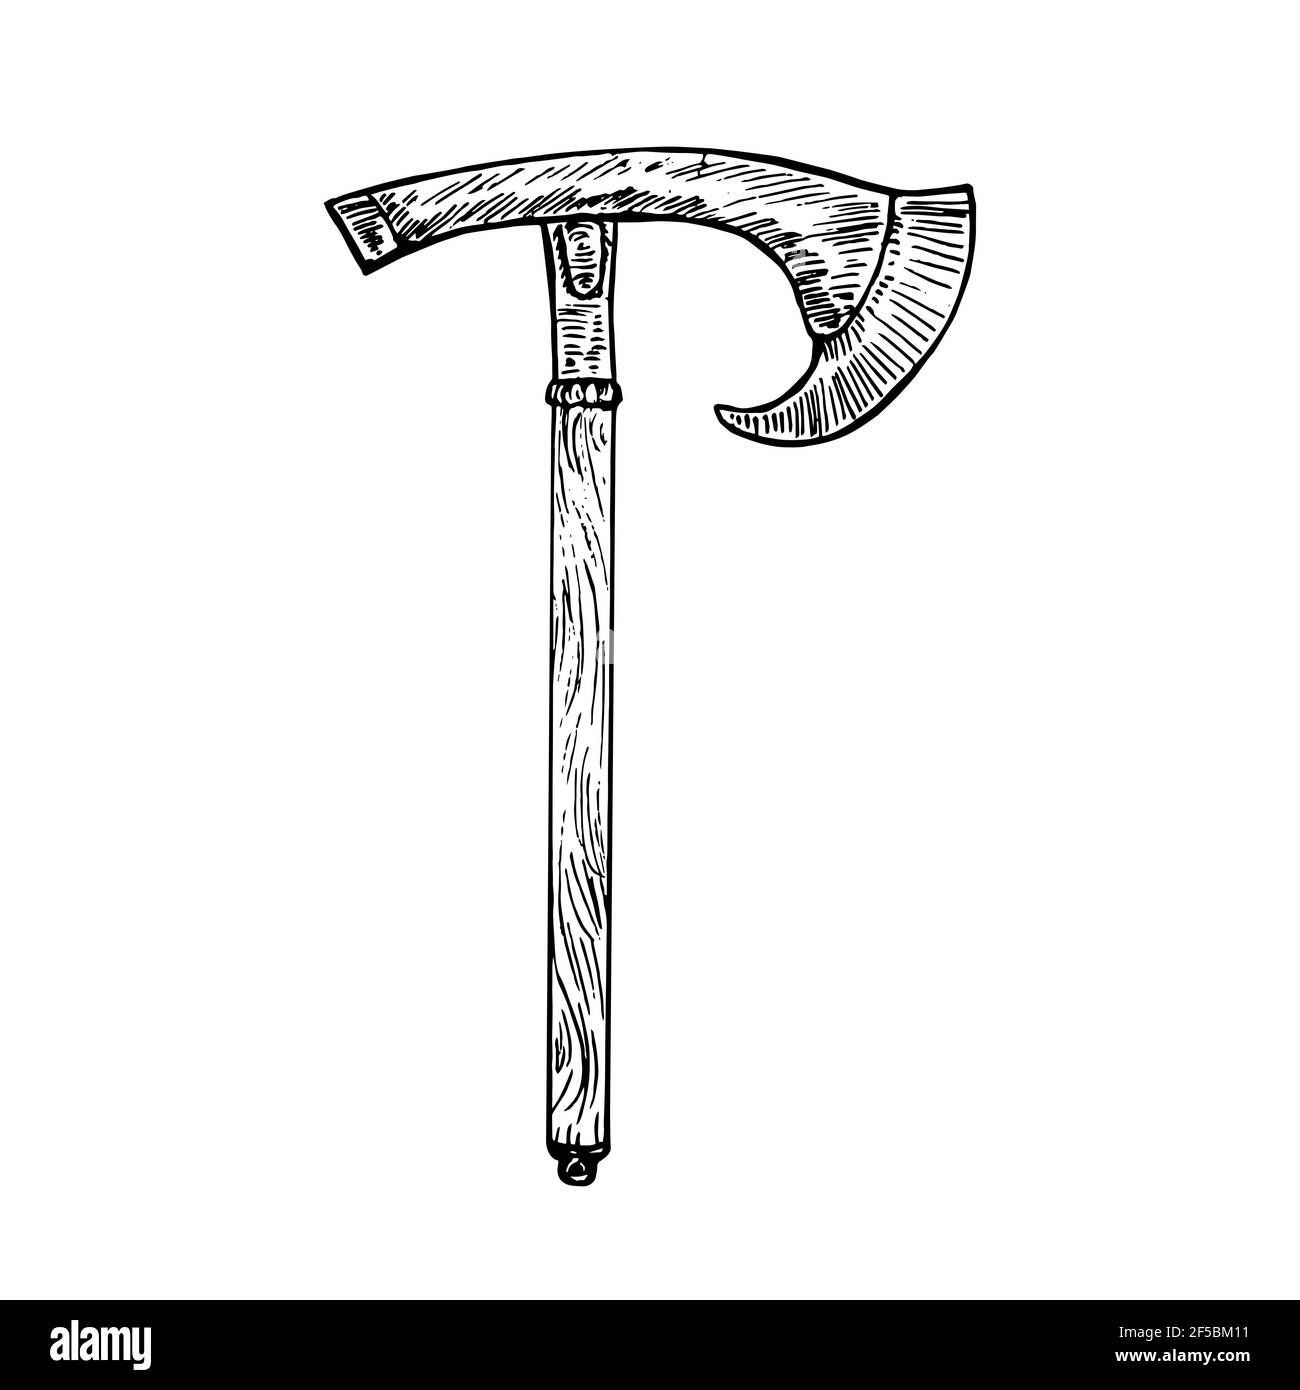 Battle axe with wooden handle, gravure style hand drawn outline illustration Stock Photo